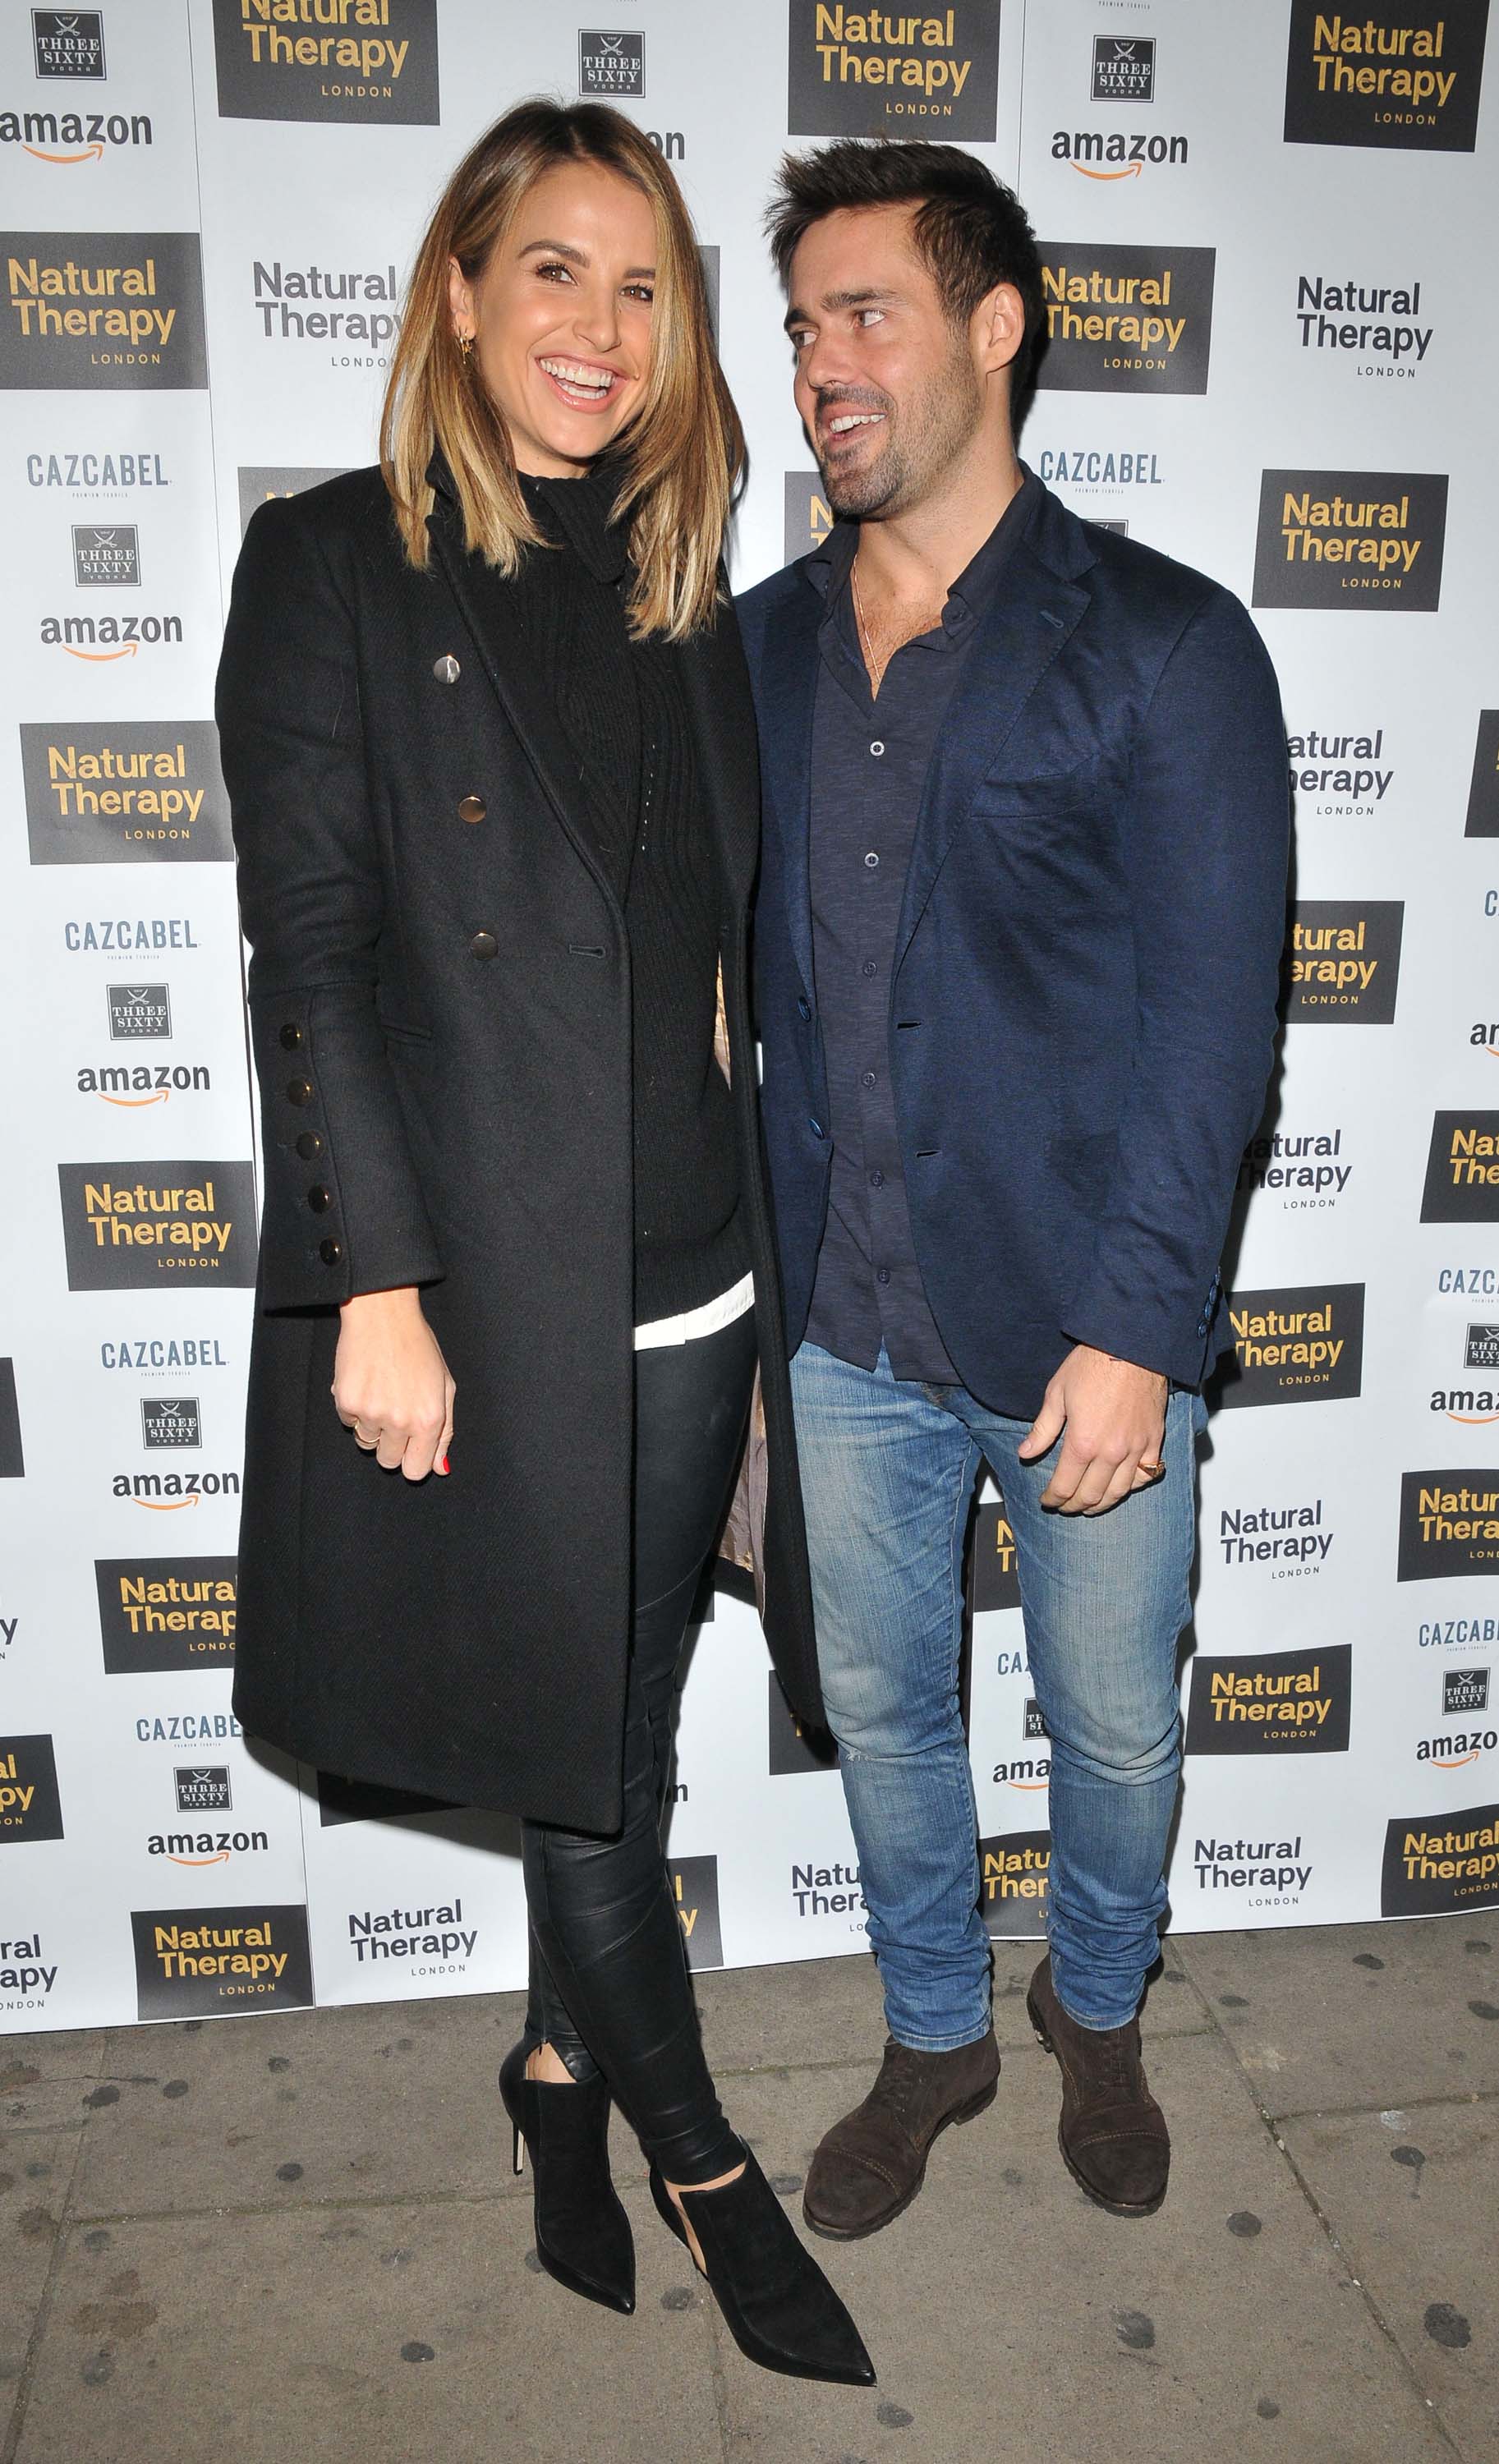 Vogue Williams attends Natural Therapy party